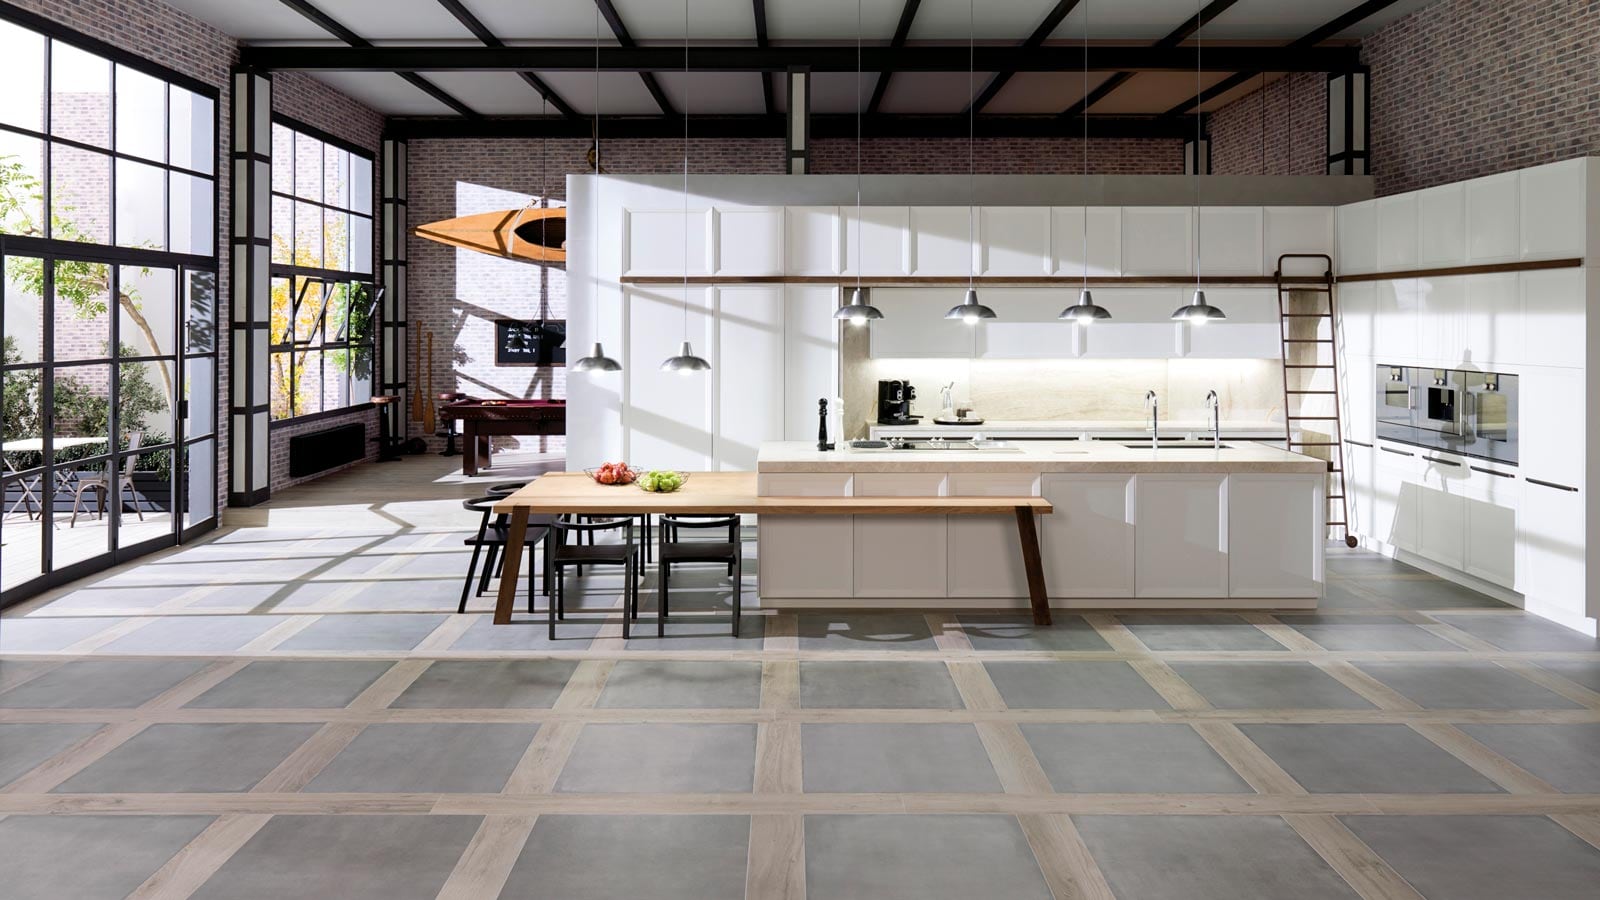 Kitchen flooring ideas combining wood and ceramic tiles ...